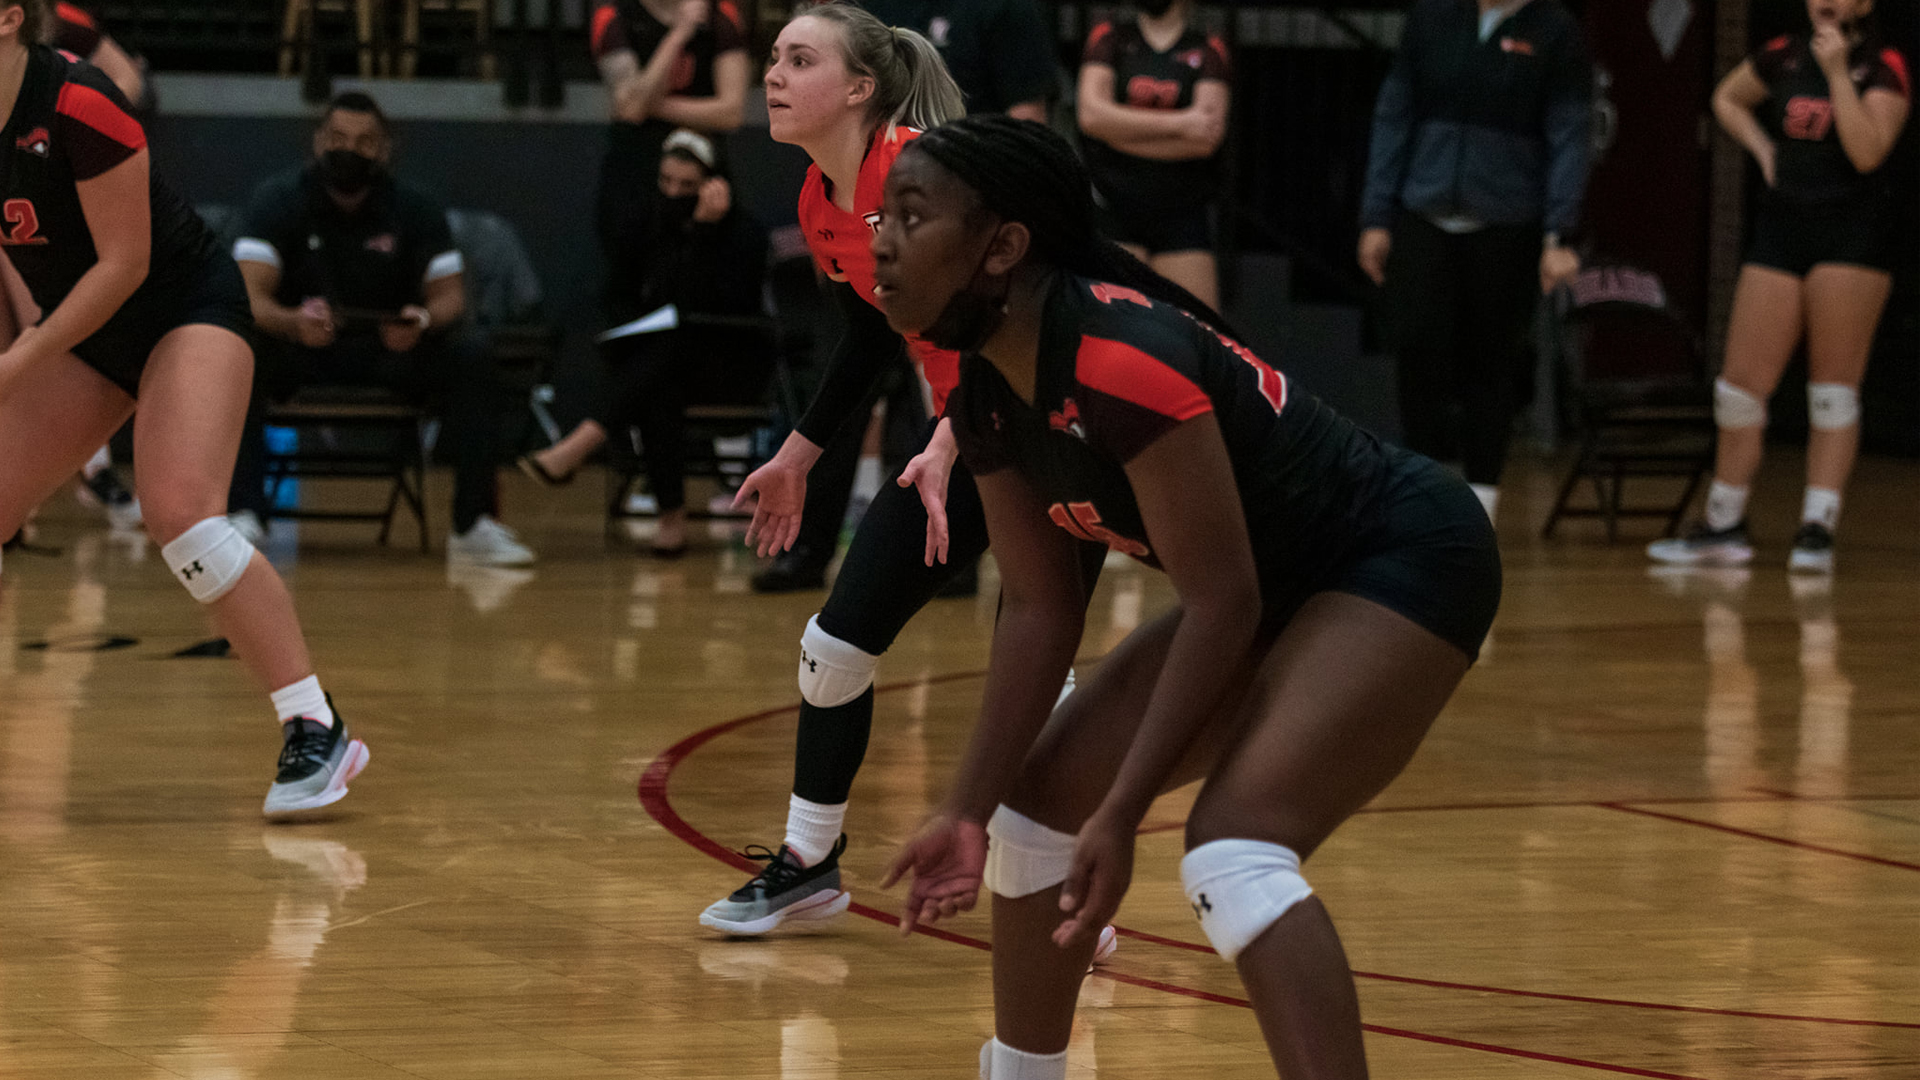 Women's Volleyball to hit court twice